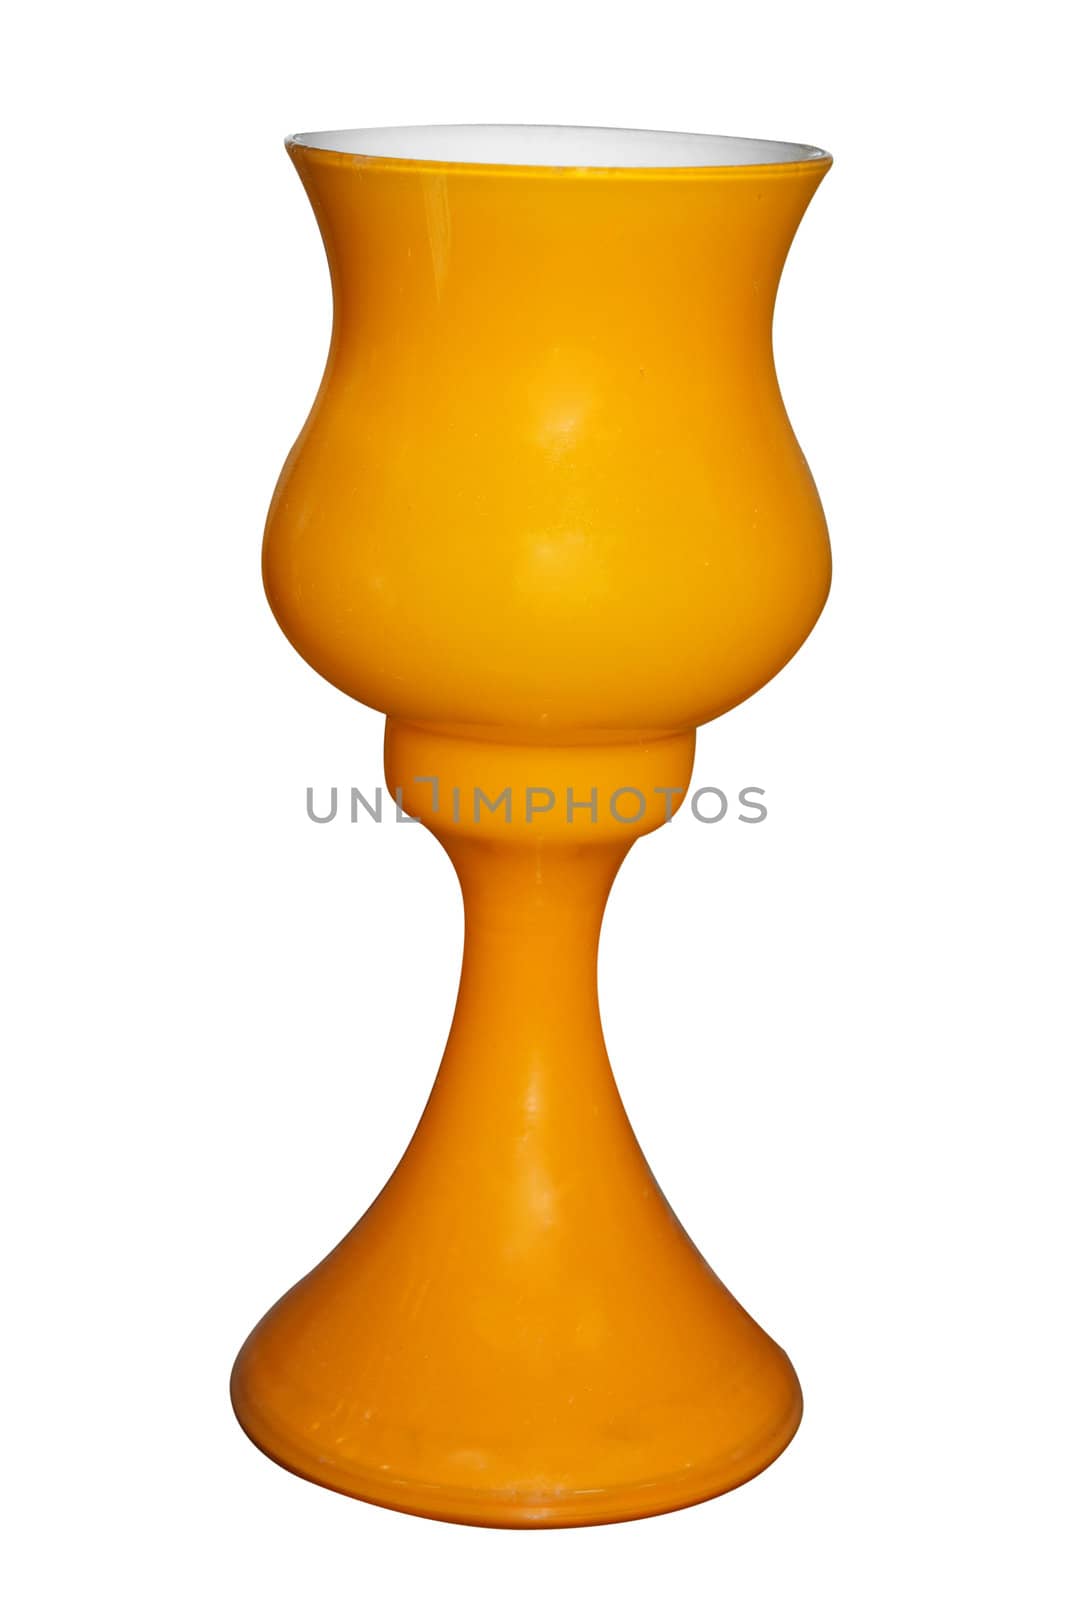 Antique Orange Glass Goblet isolated with clipping path          